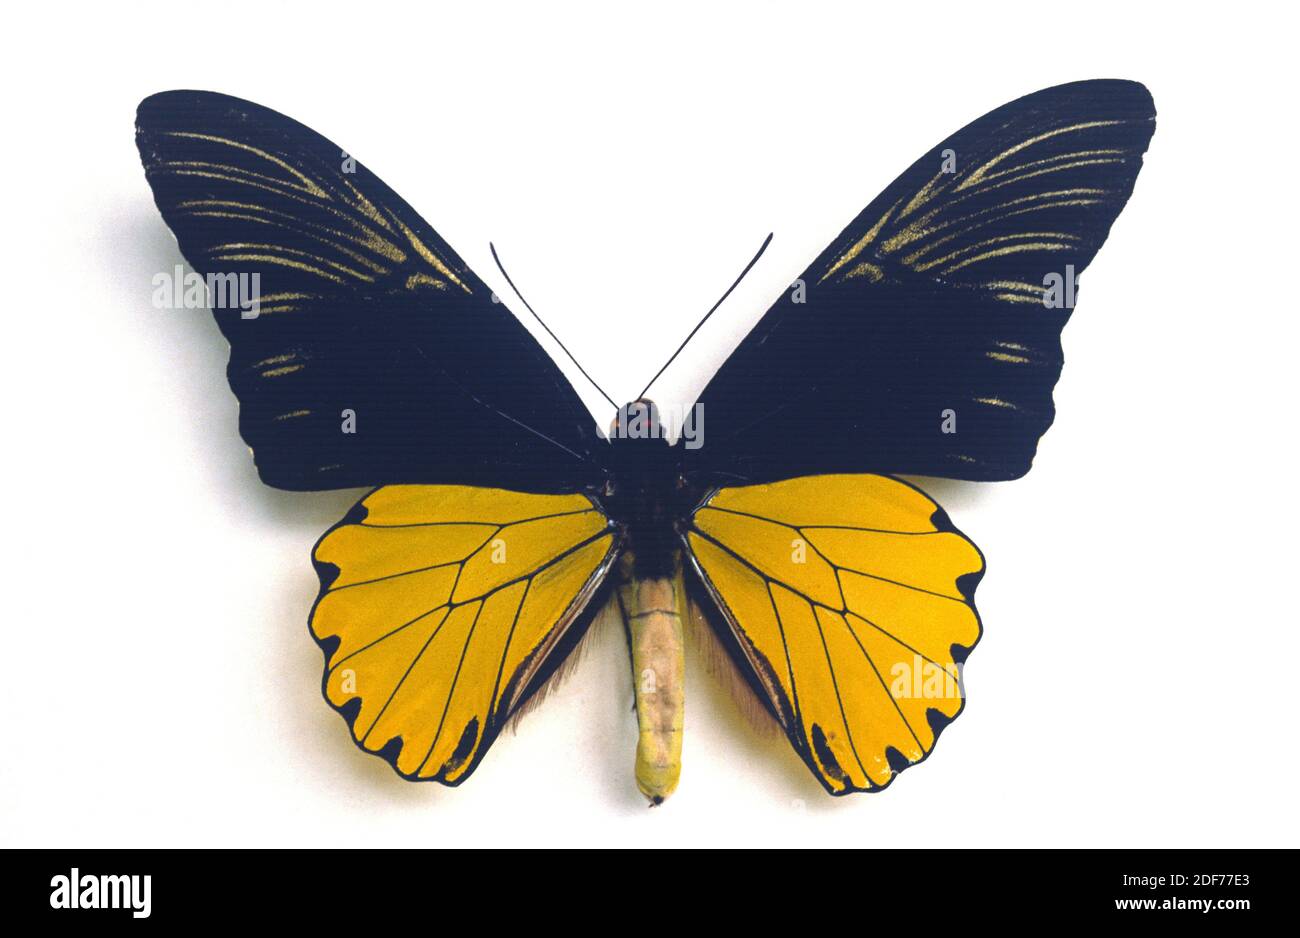 Malaya birdwing (Troides amphrysus ruficollis) is a butterfly native to Malaya Peninsula and Thailand. Adult, dorsal side. Stock Photo